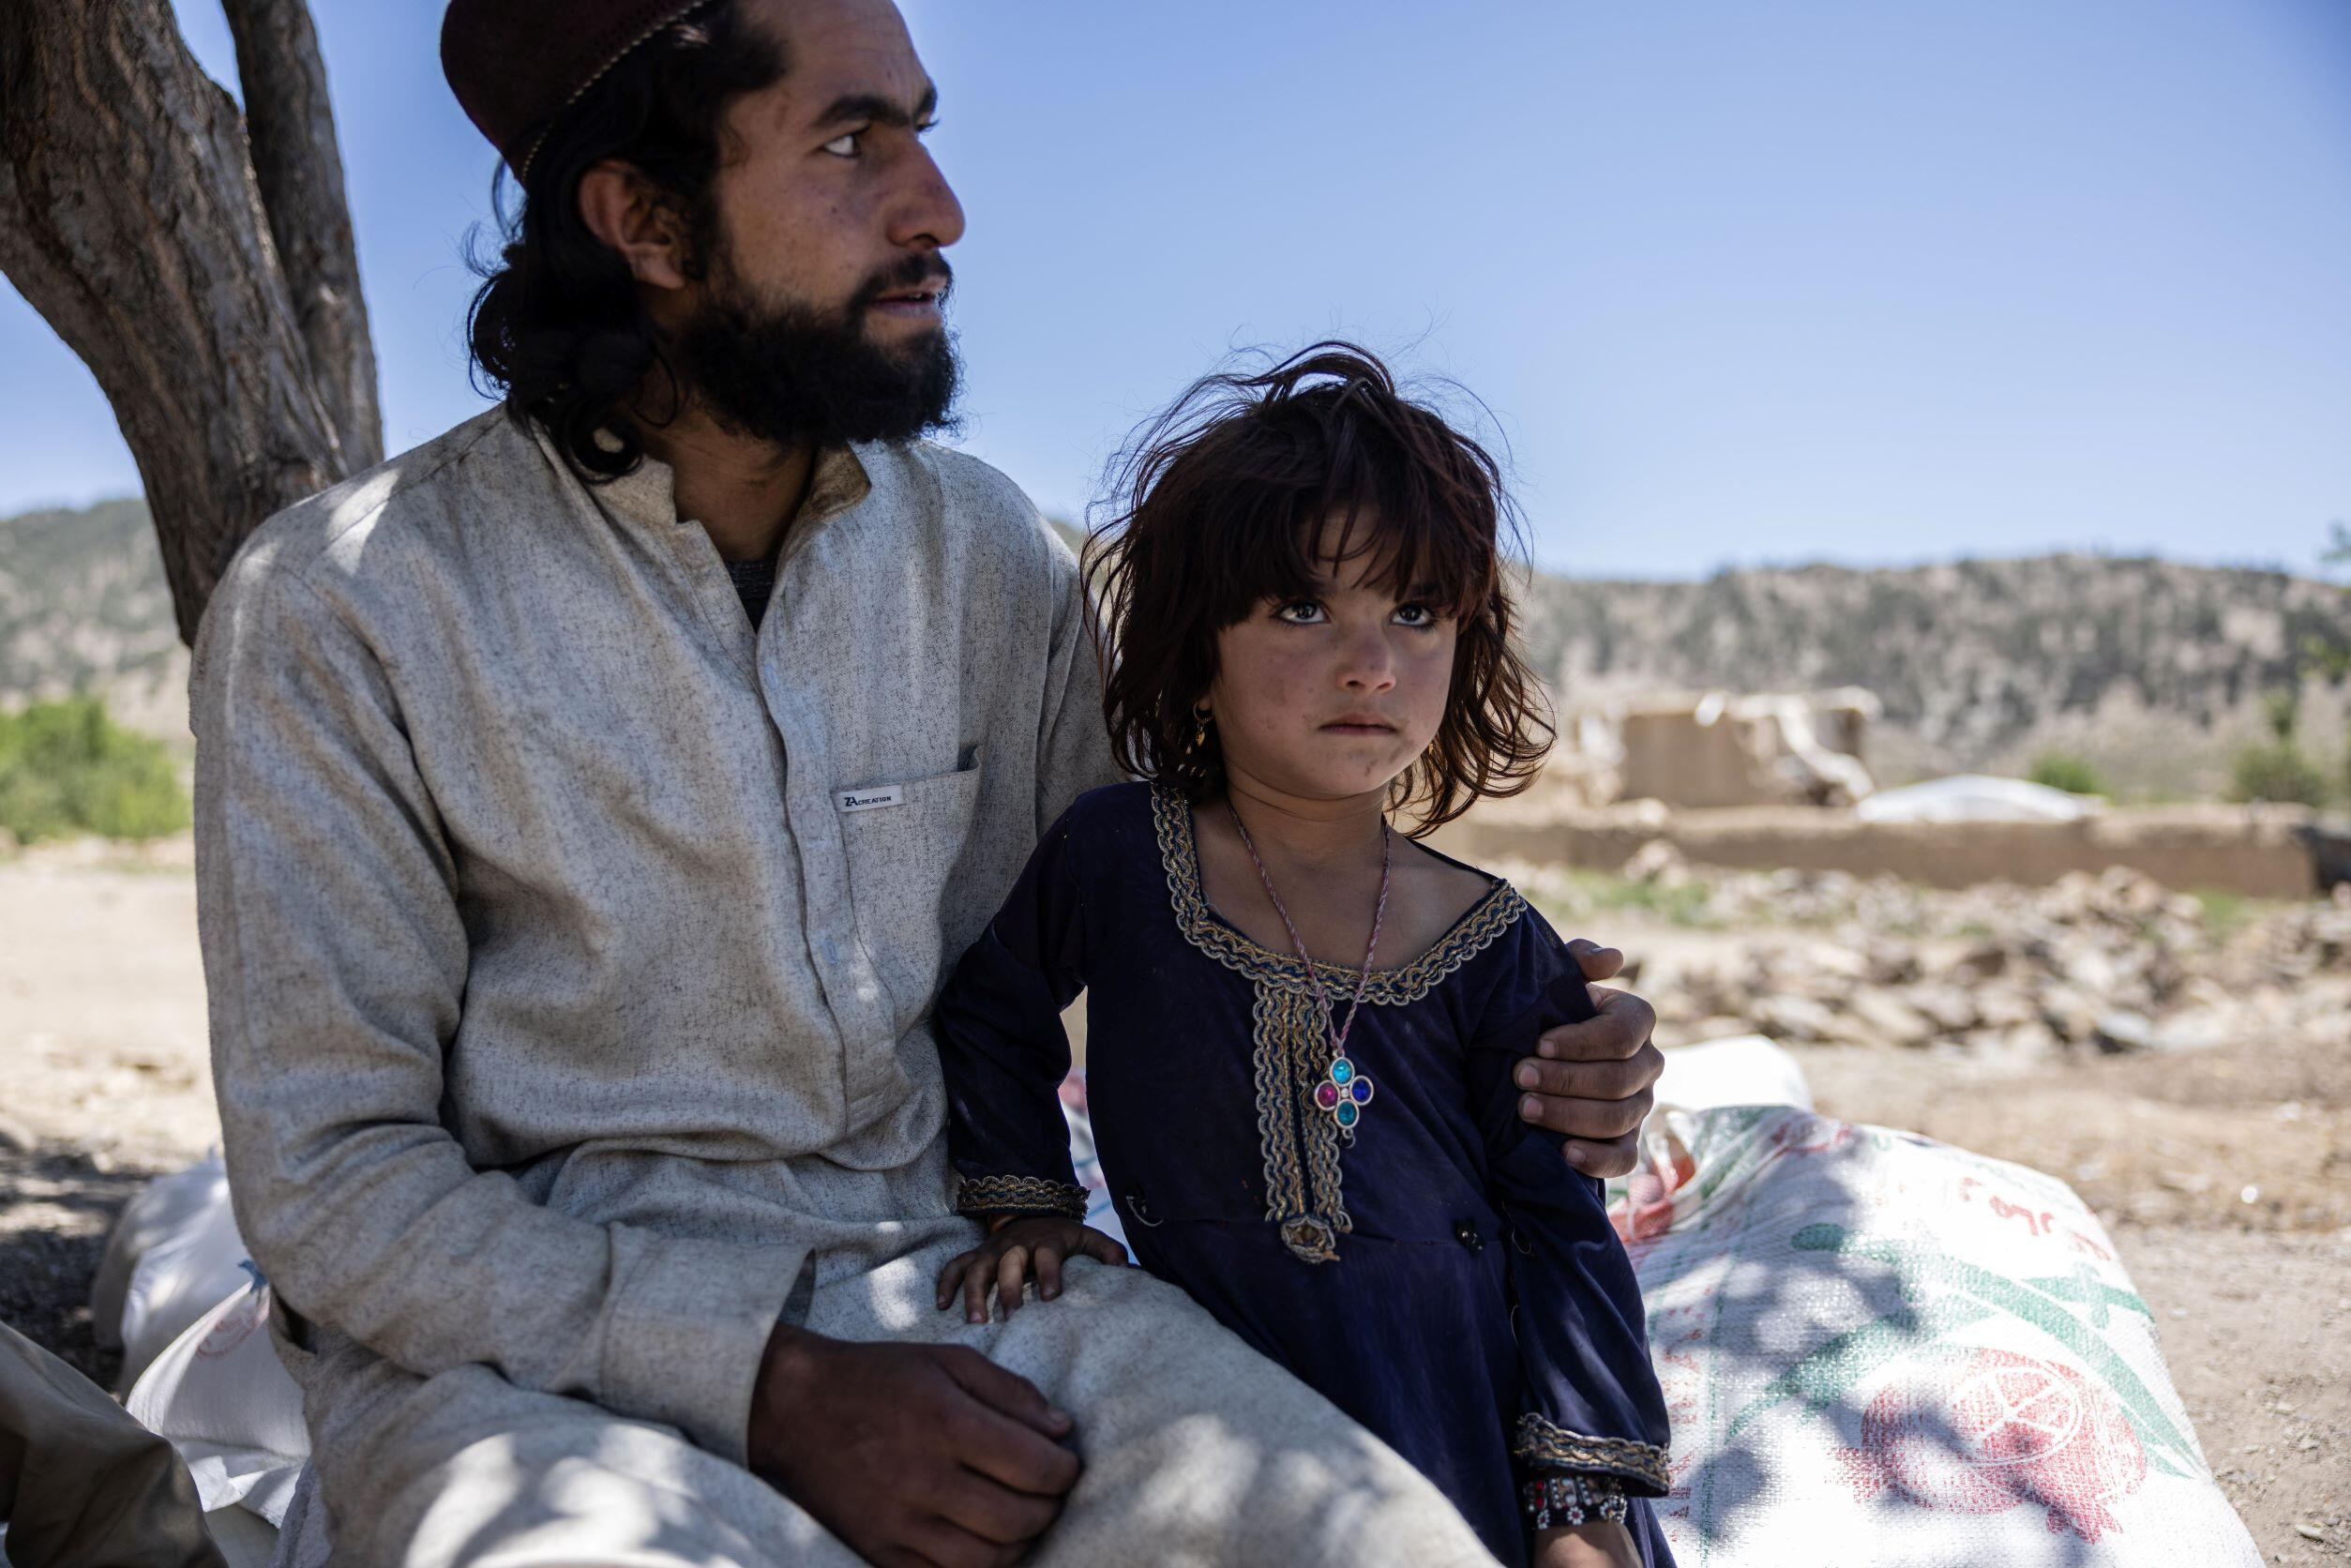 Afghanistan earthquake - An older brother holds his younger sister while looking at the damage to their house